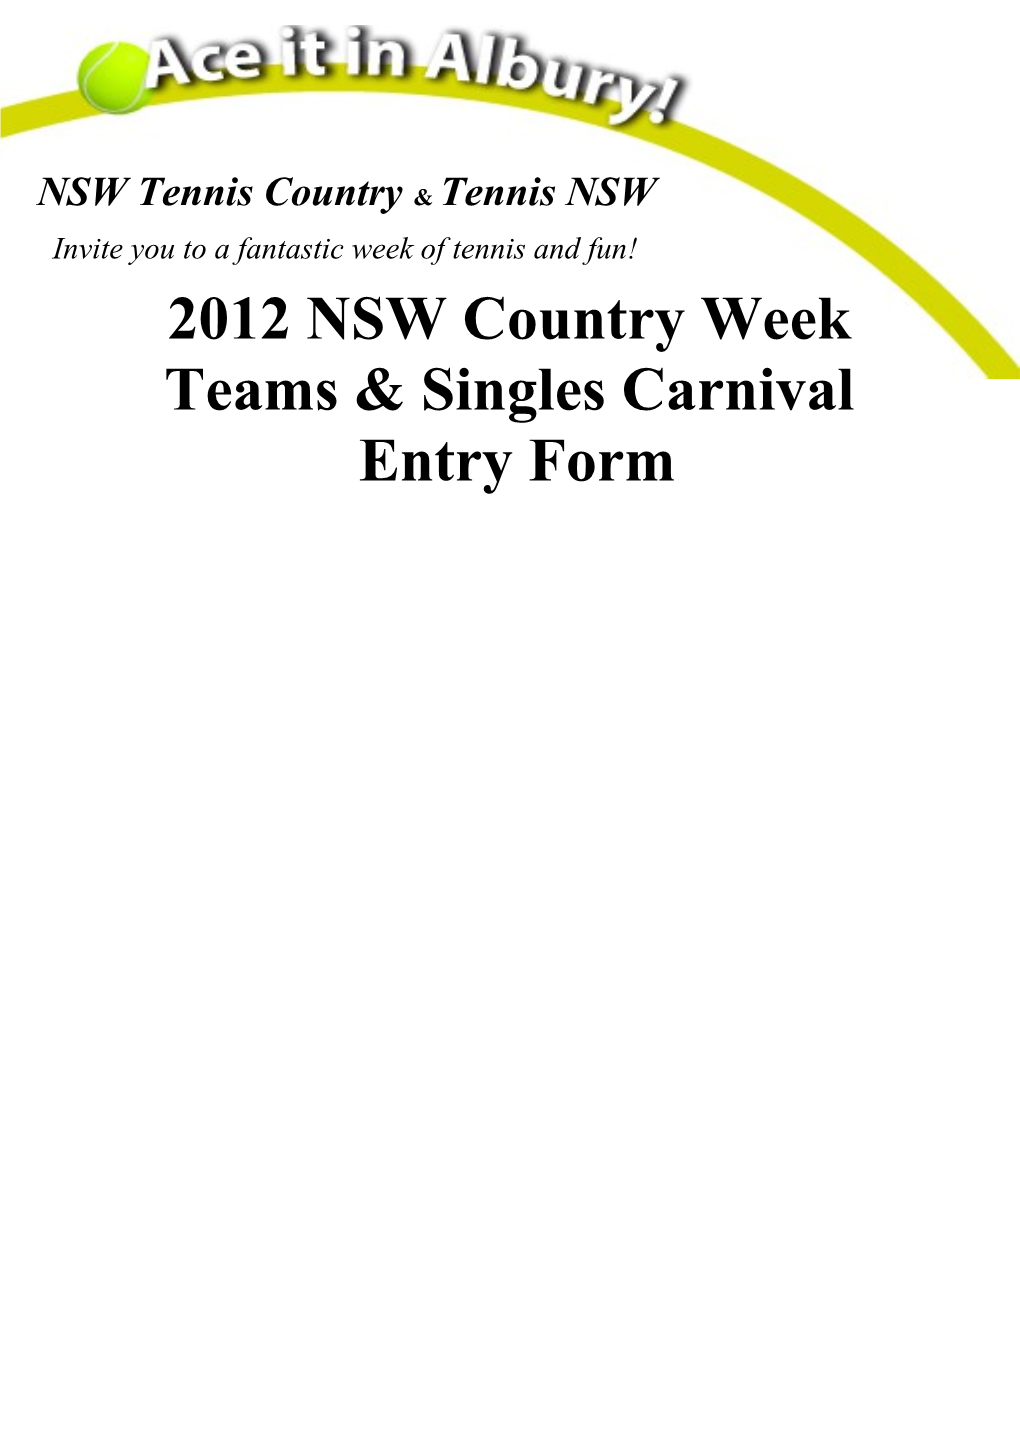 2012 NSW Country Week ENTRY FORM (Fillable)